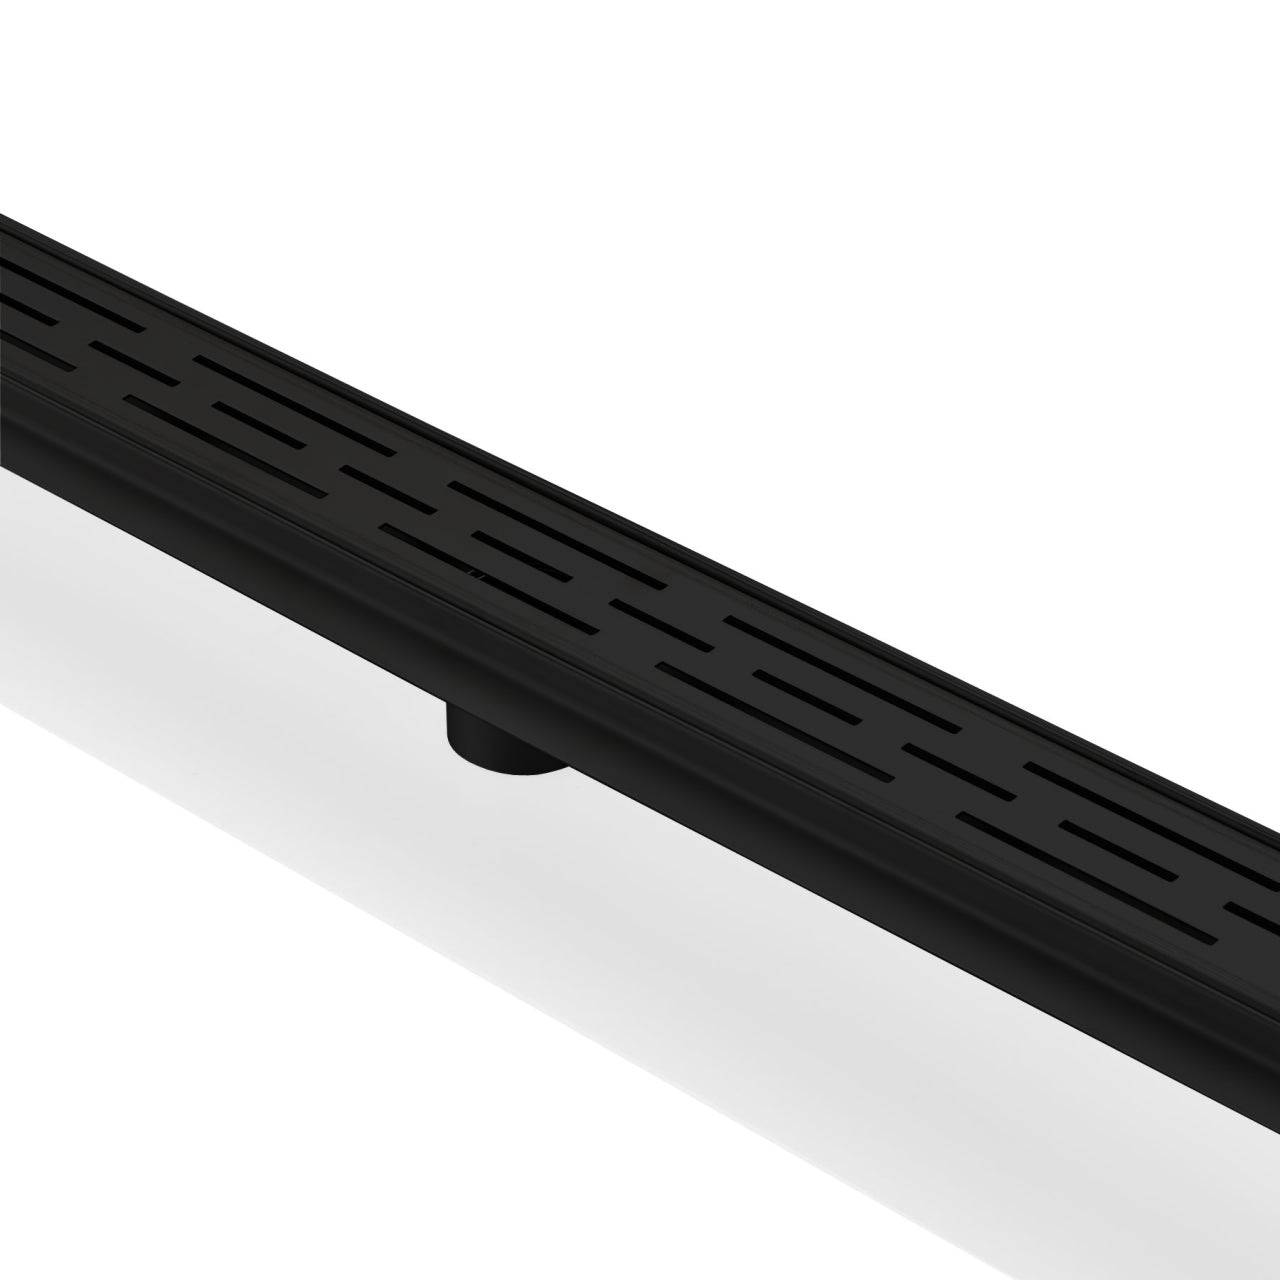 Kube 47.25" Linear Drain with Linear Grate - Bhdepot 